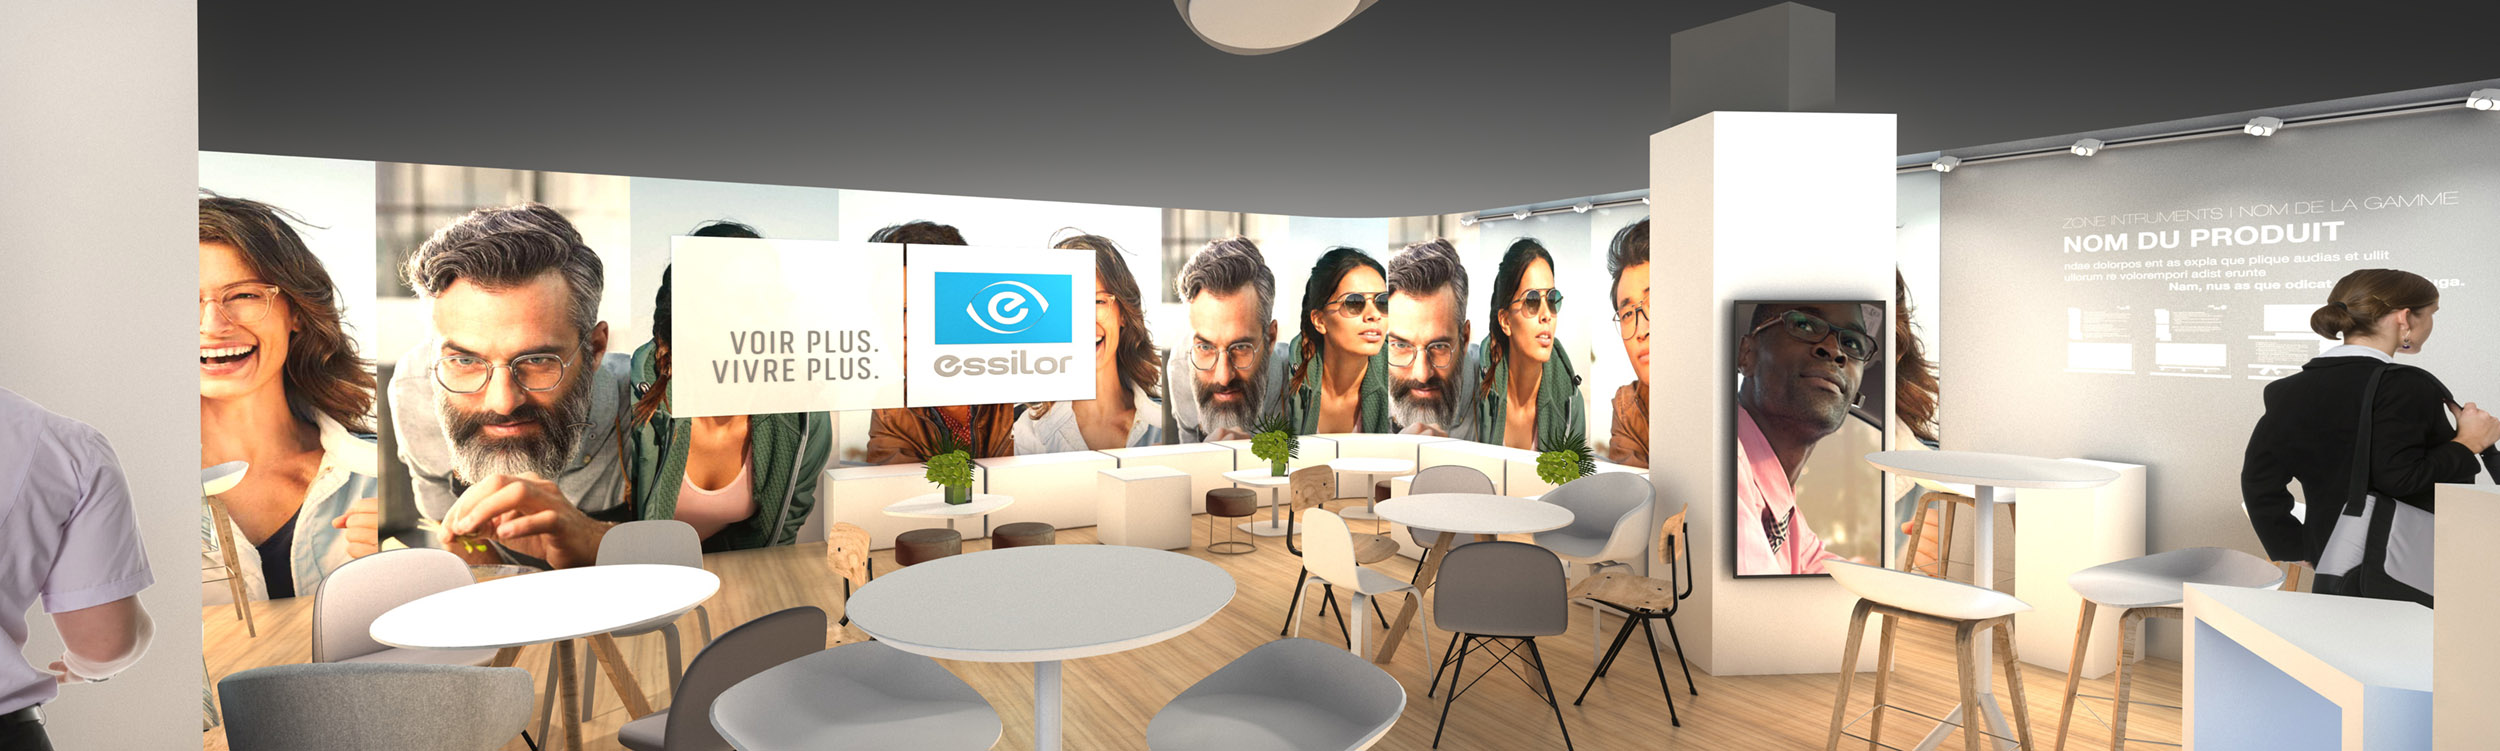 stand booth essilor sfo 14.jpg